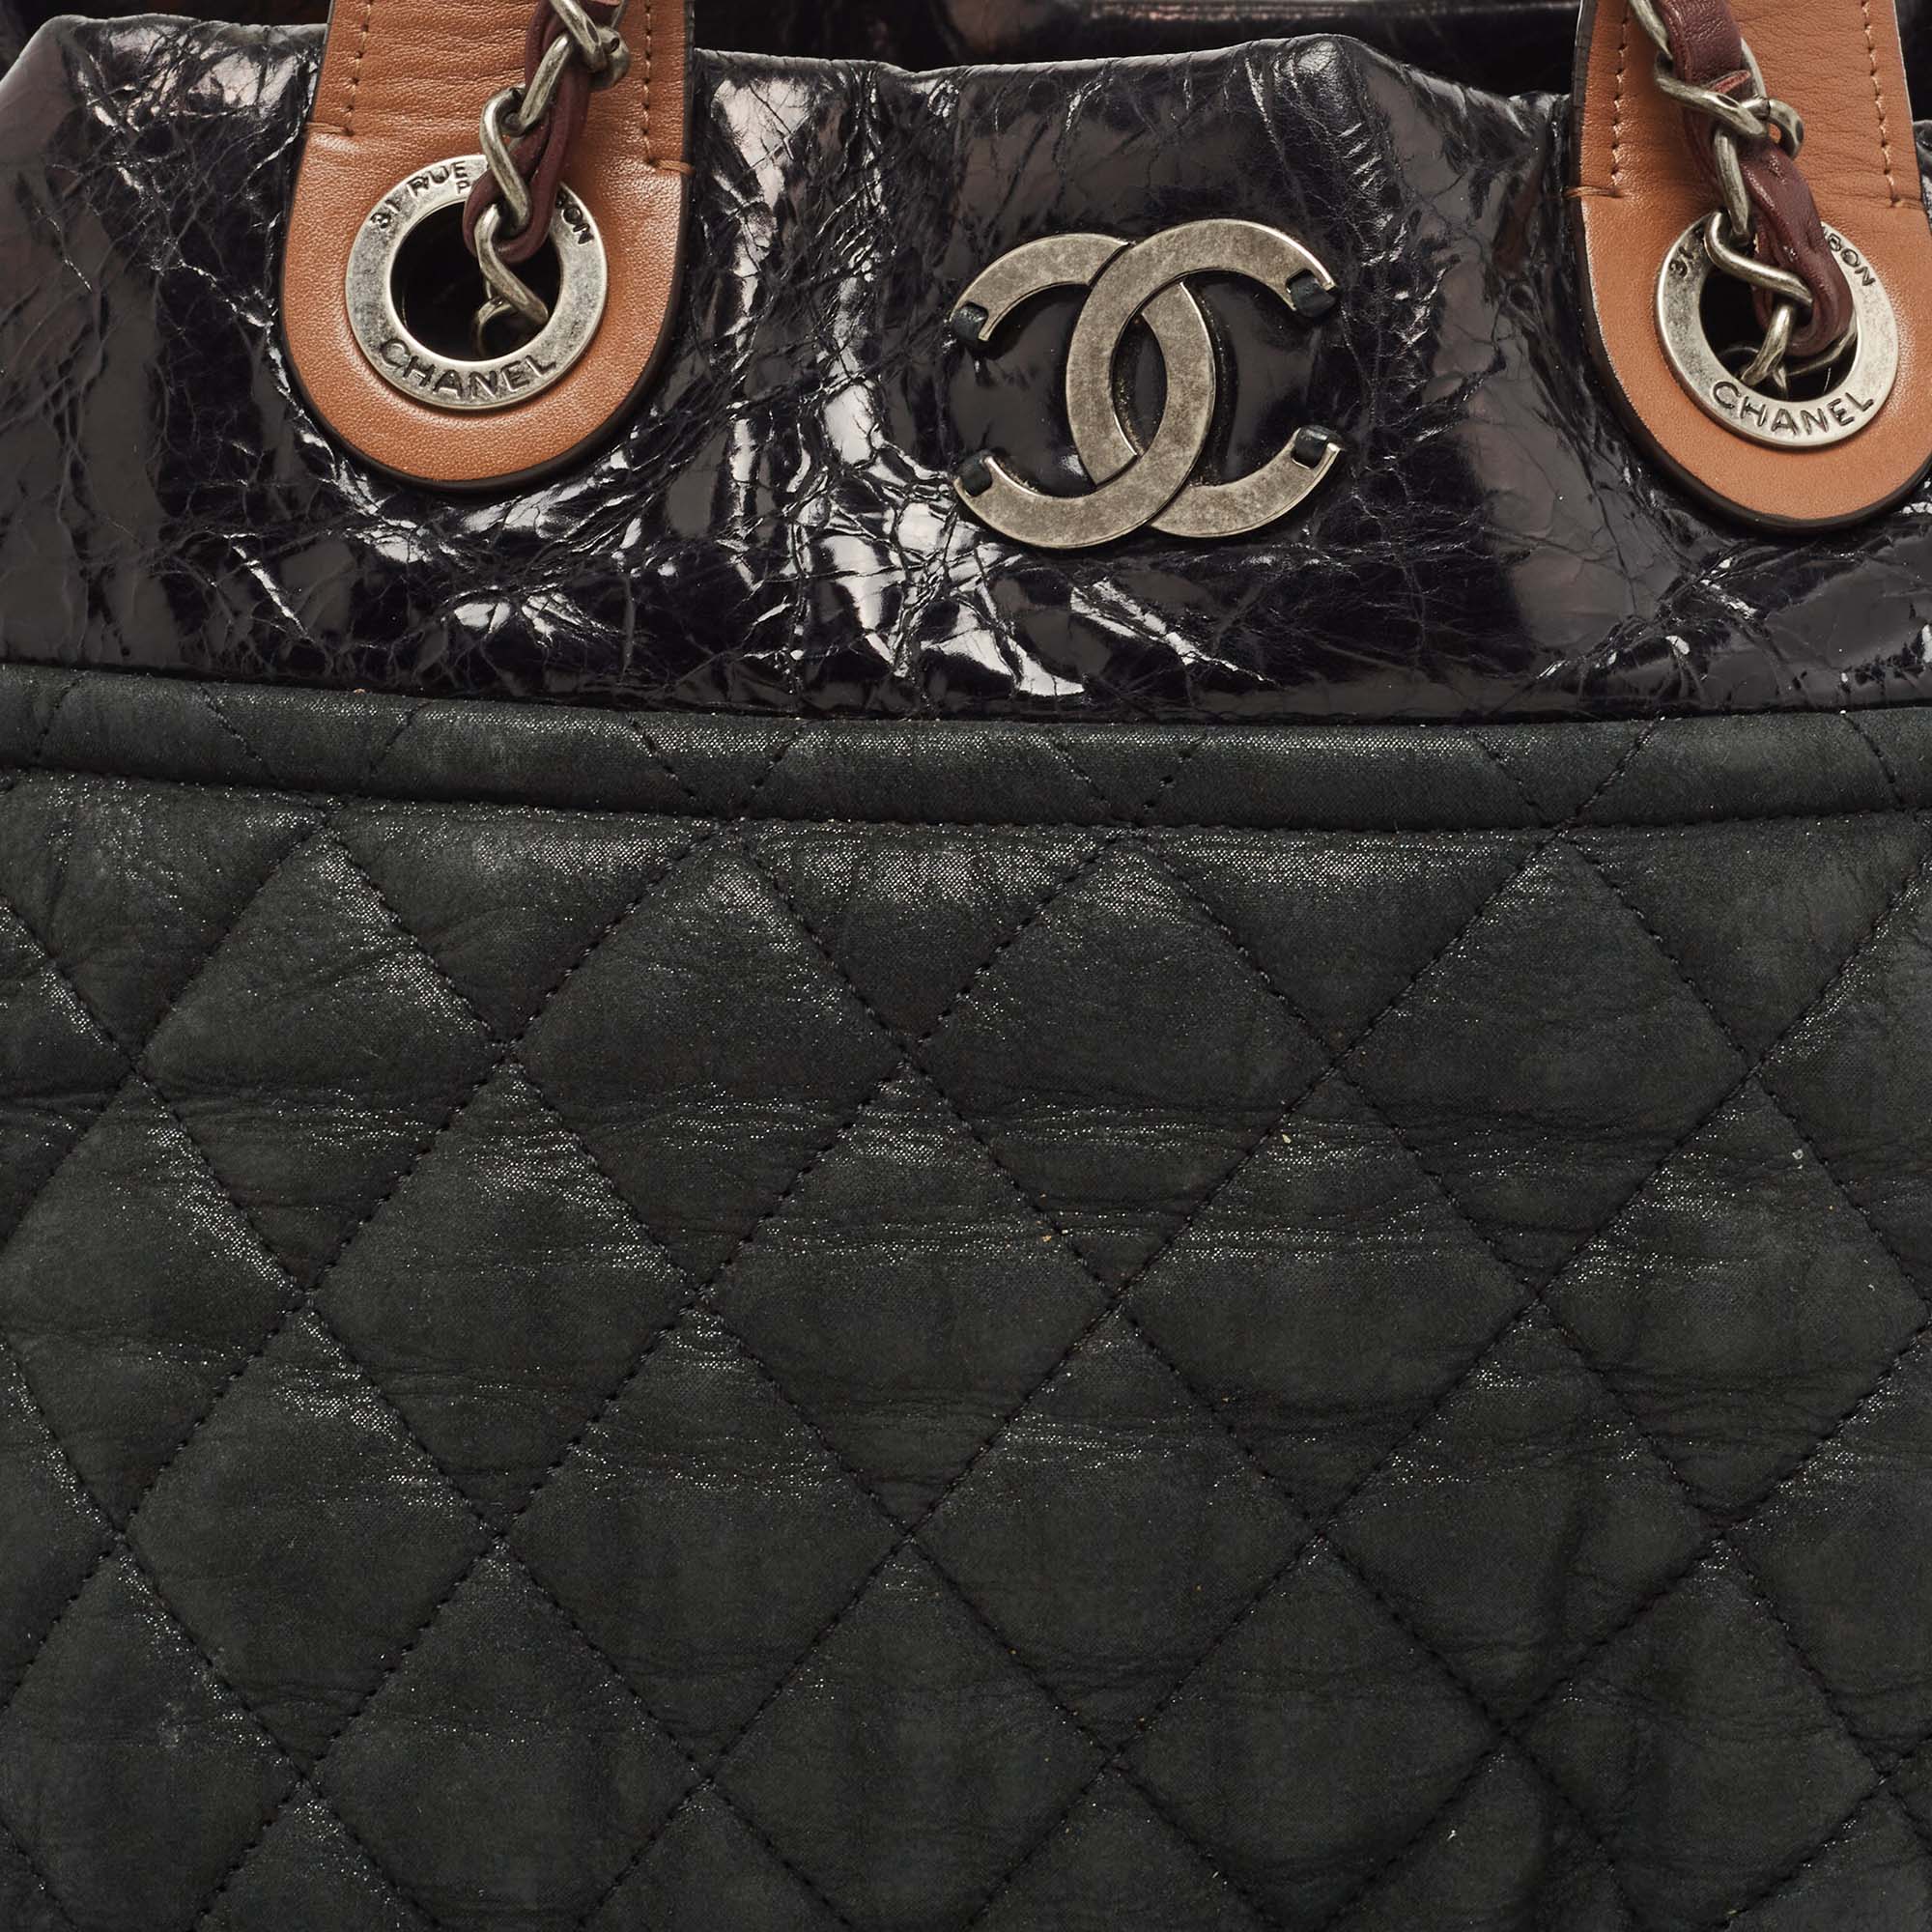 Chanel Black/Burgundy Quilted Nubuck And Leather In The Mix Bag